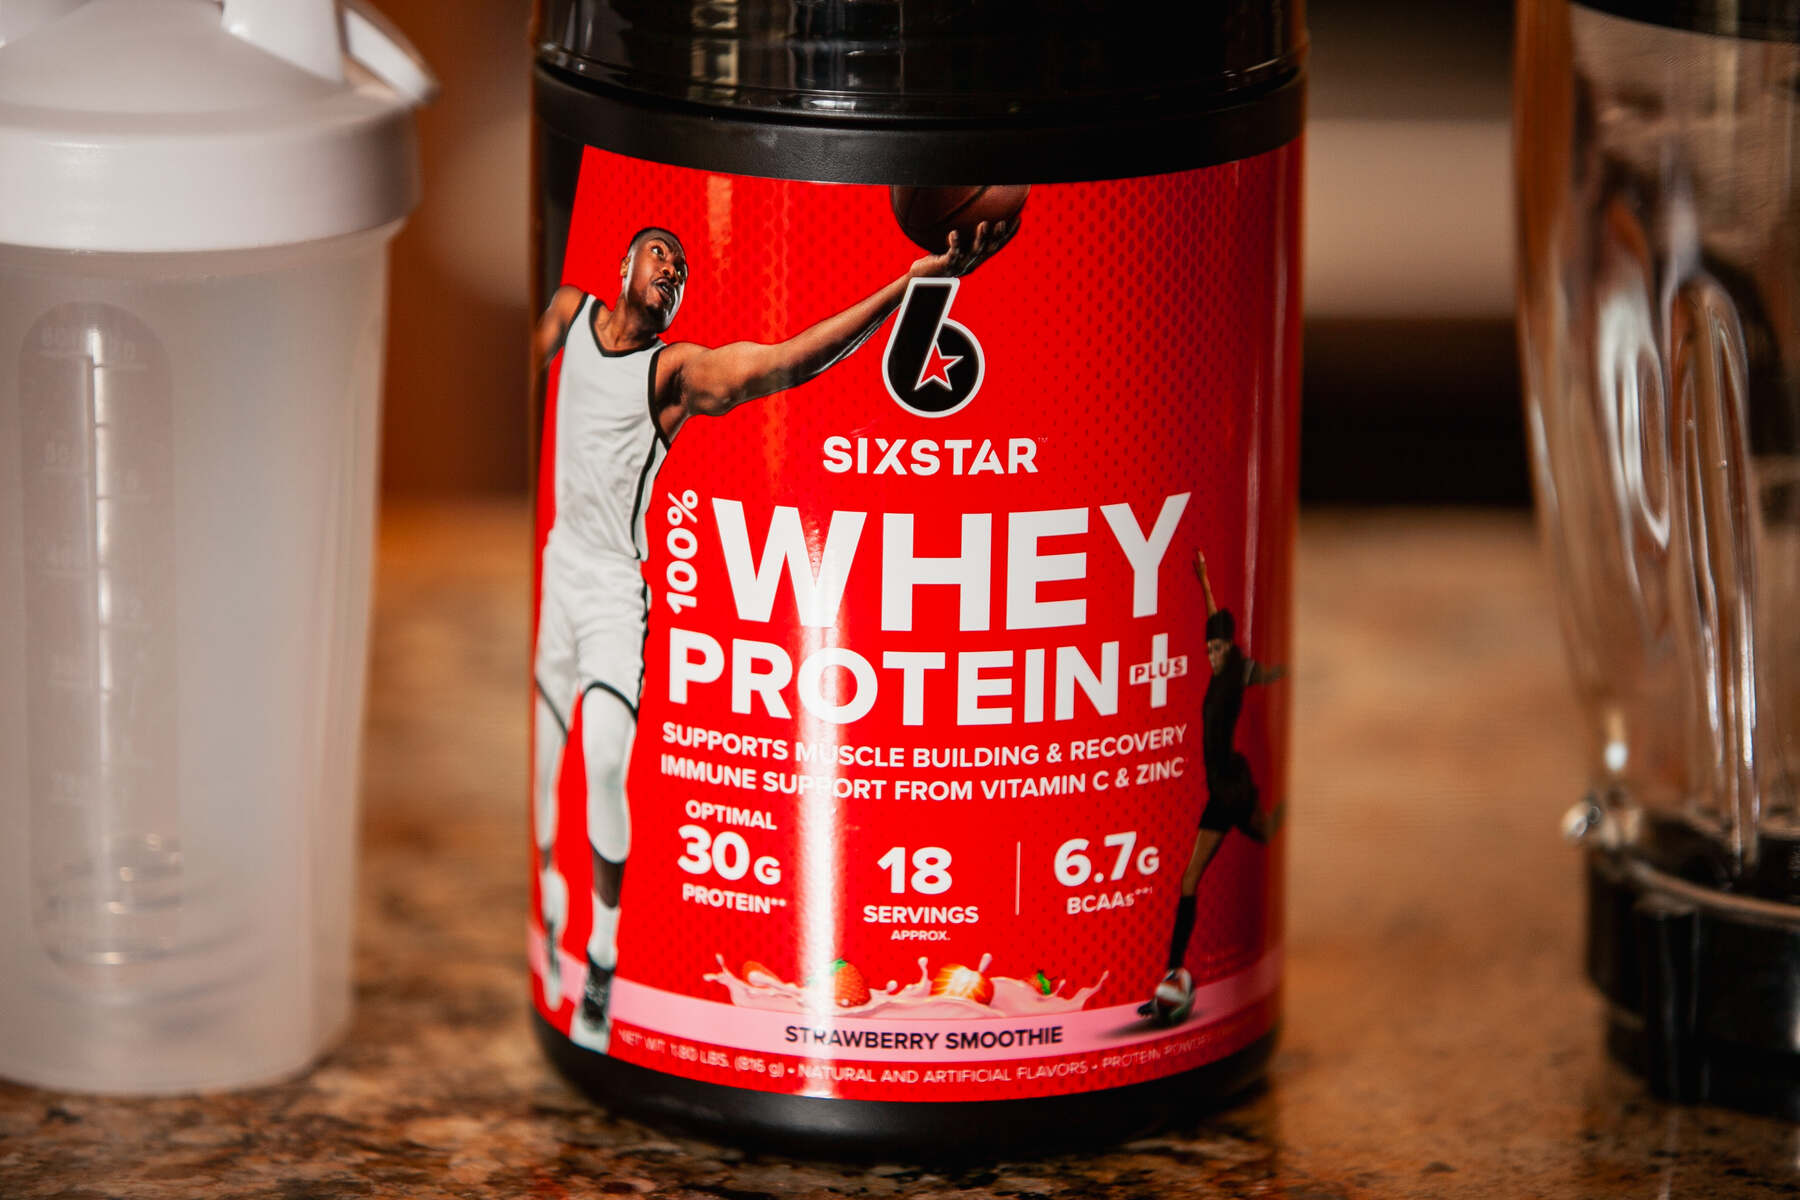 A "Six Star Whey Protein" container with an athlete's image, next to a shaker bottle, emphasizing muscle support and immune health